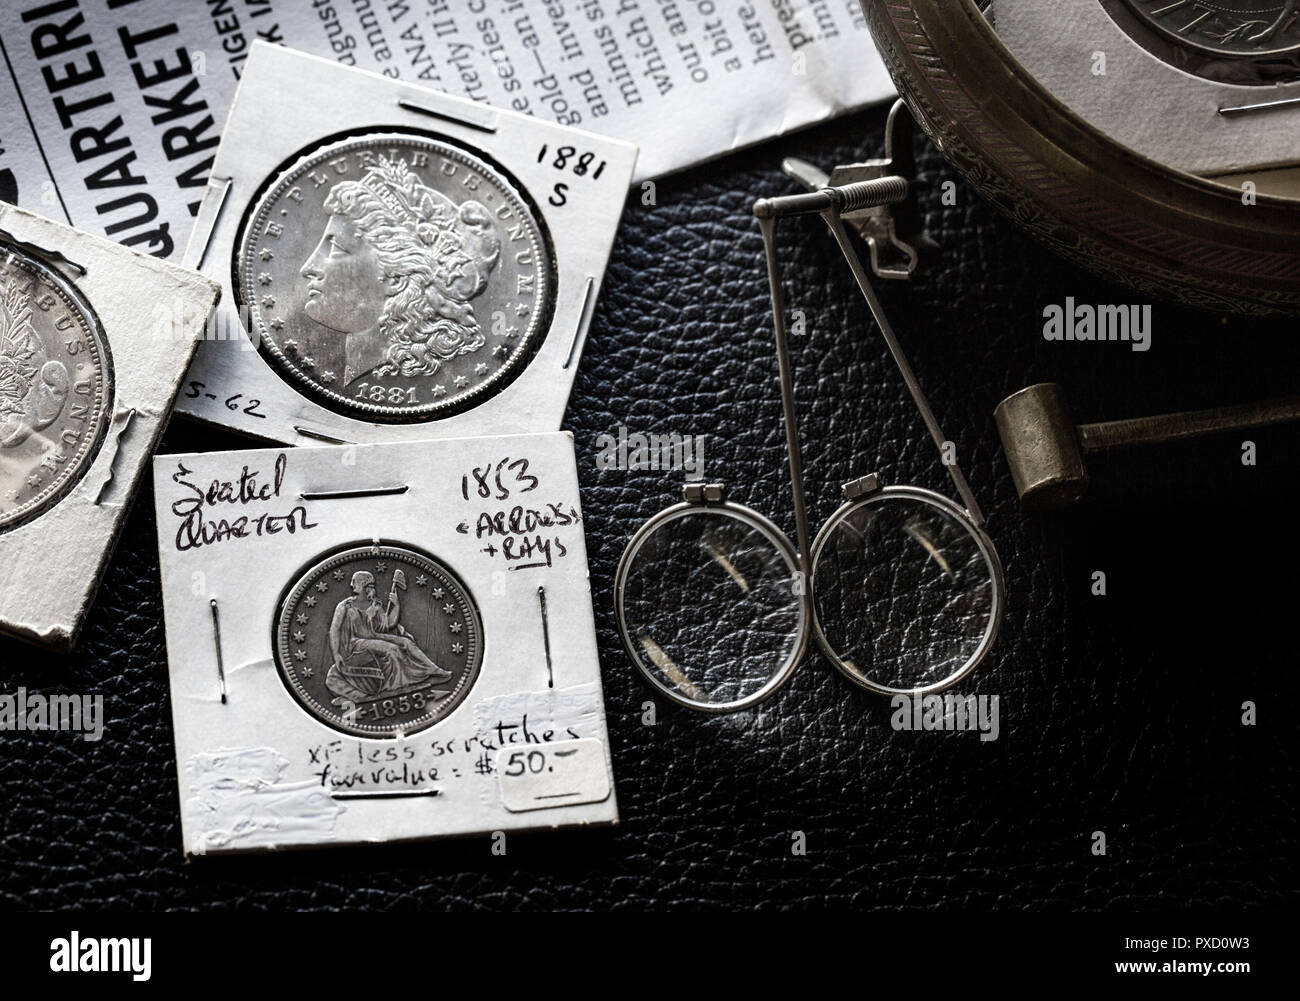 Coin Collecting - Various Coins - Morgan Dollars - Seated Liberty - against backdrop of the Greysheet with magnifiers Stock Photo